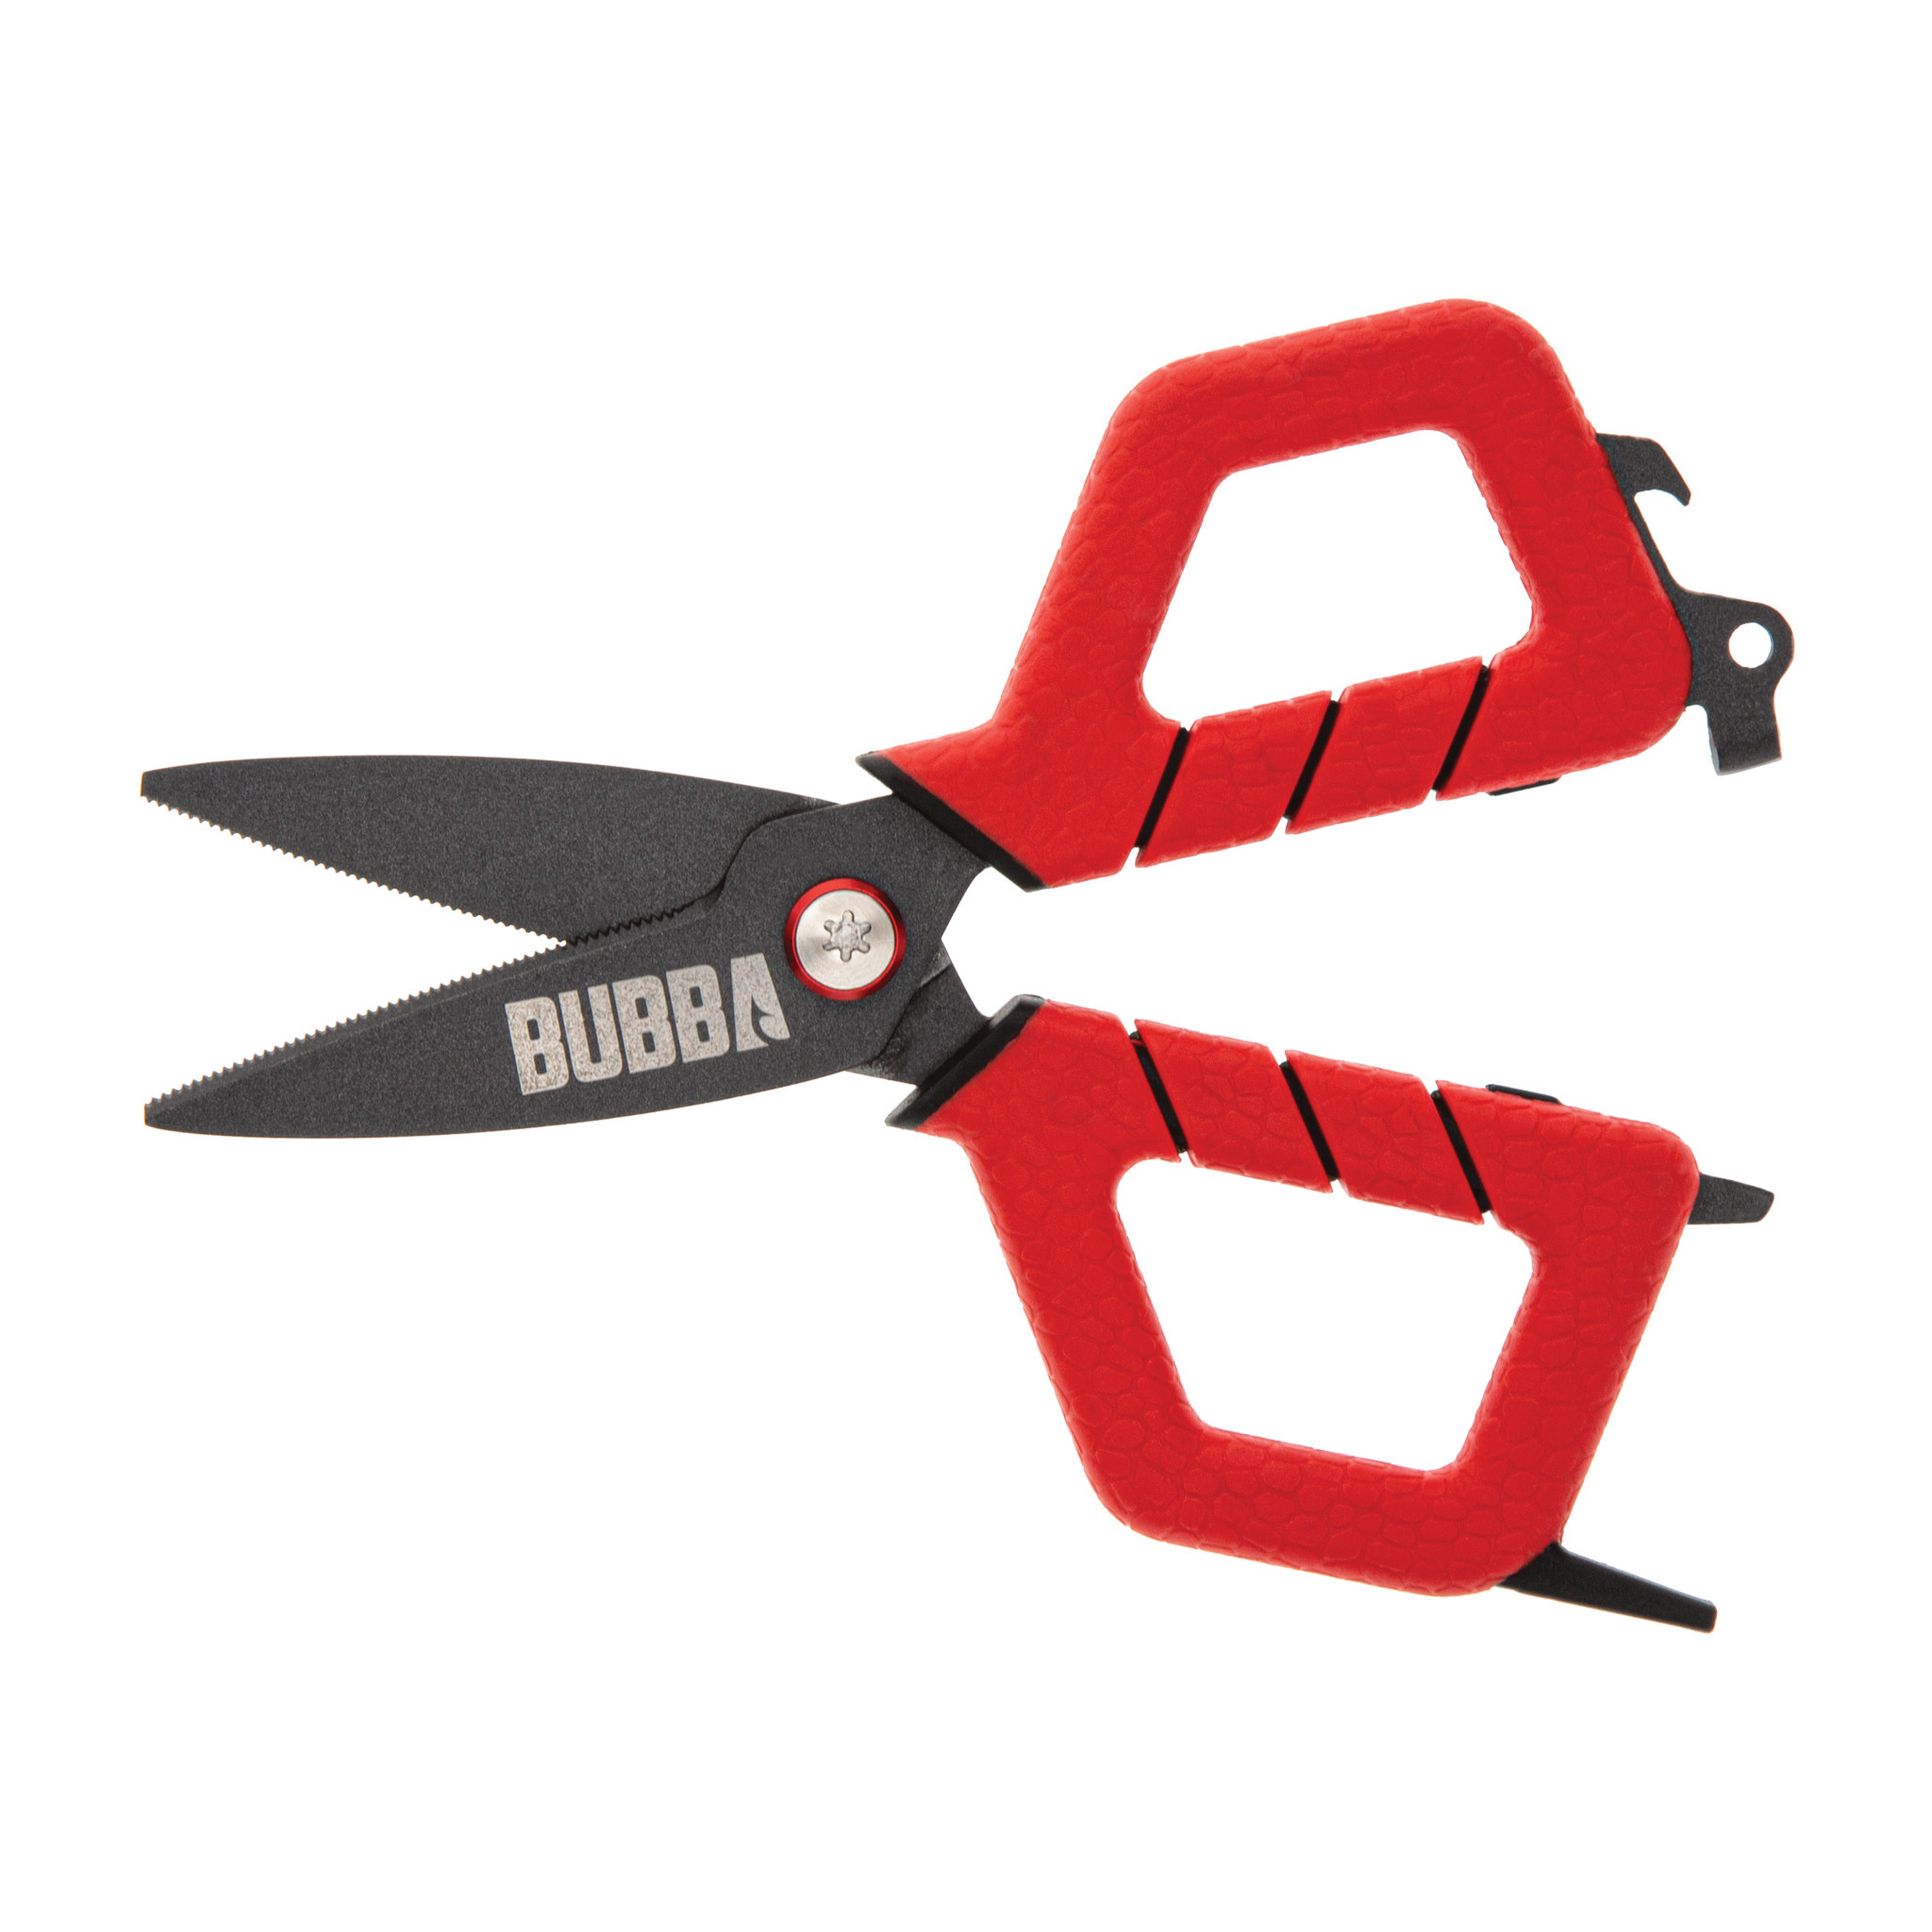 Bubba Unveils Three New Fishing Shear Designs for 2021 - Wide Open Spaces